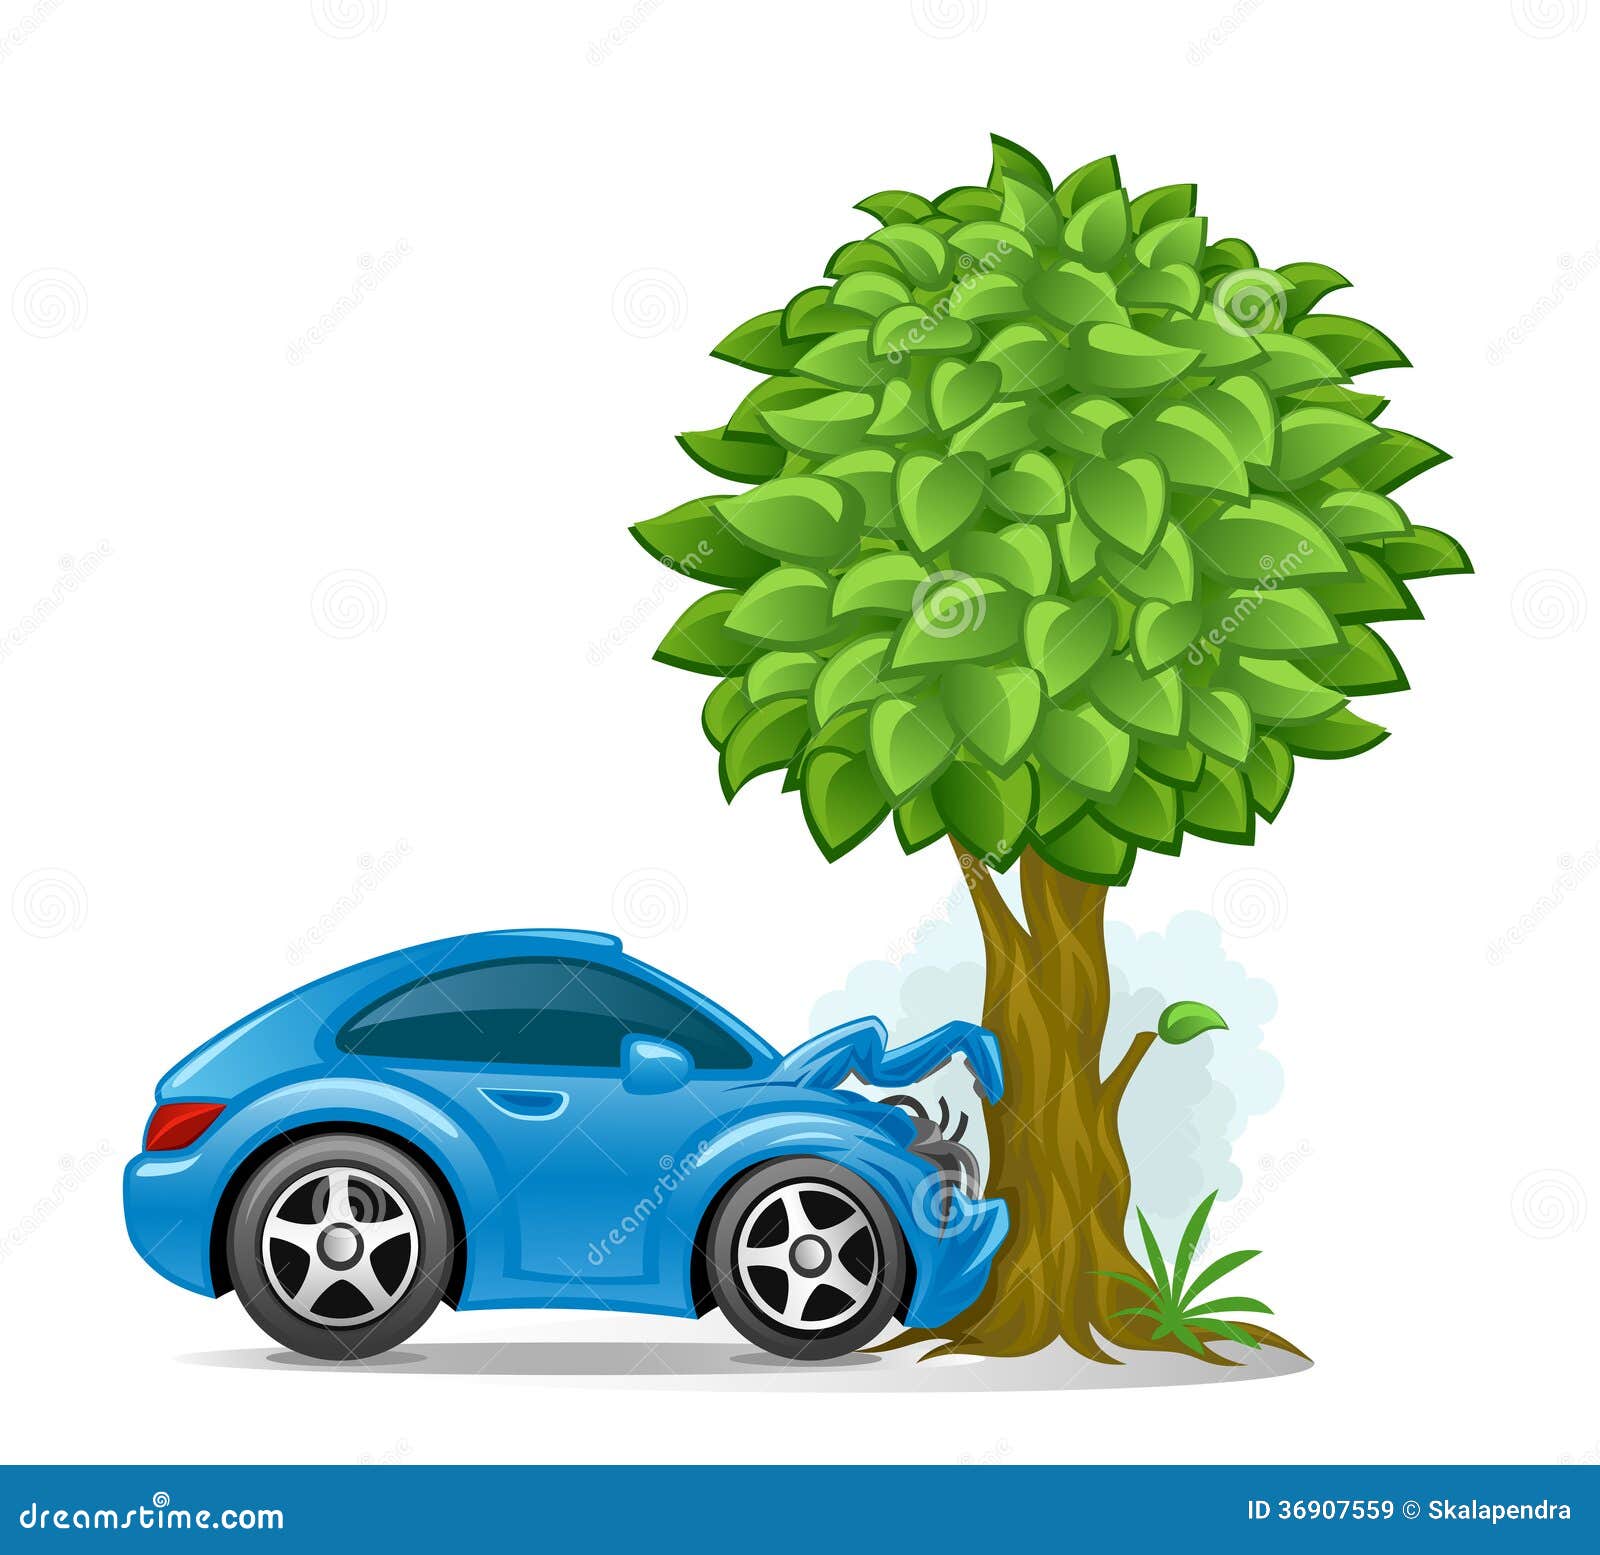 free clipart wrecked car - photo #33